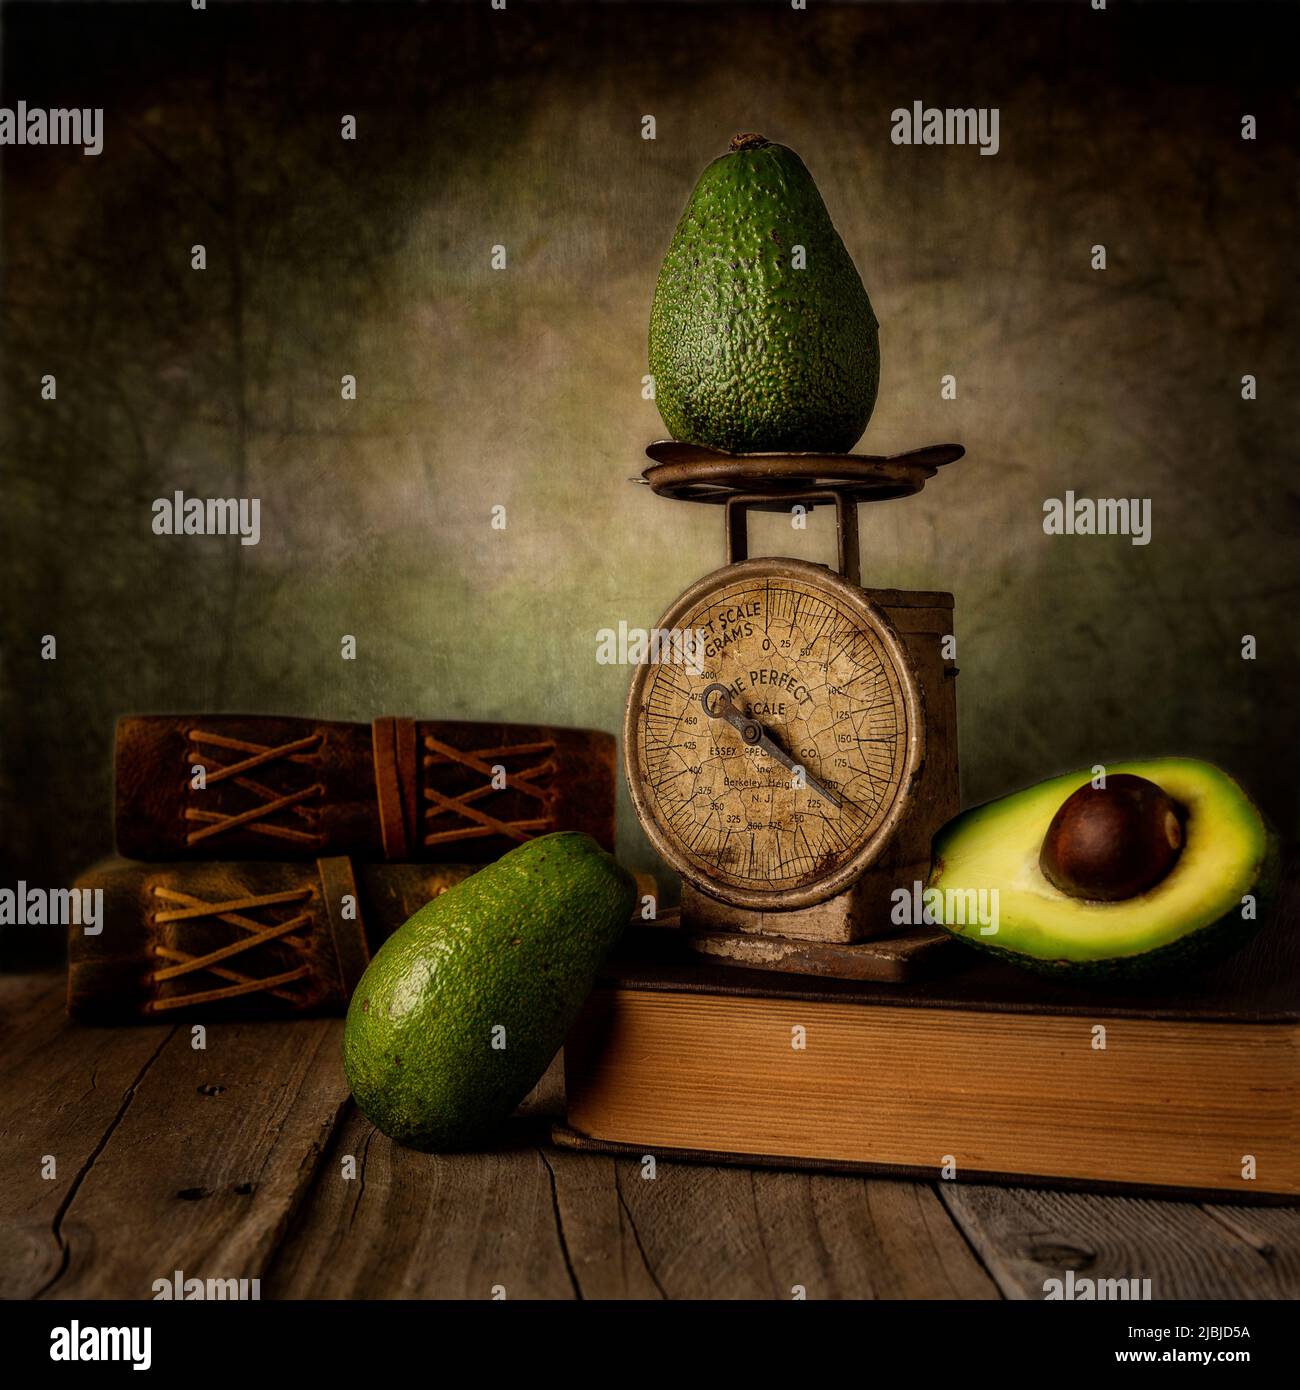 Avocado with smal vintage scale on table with old books still life photography Stock Photo